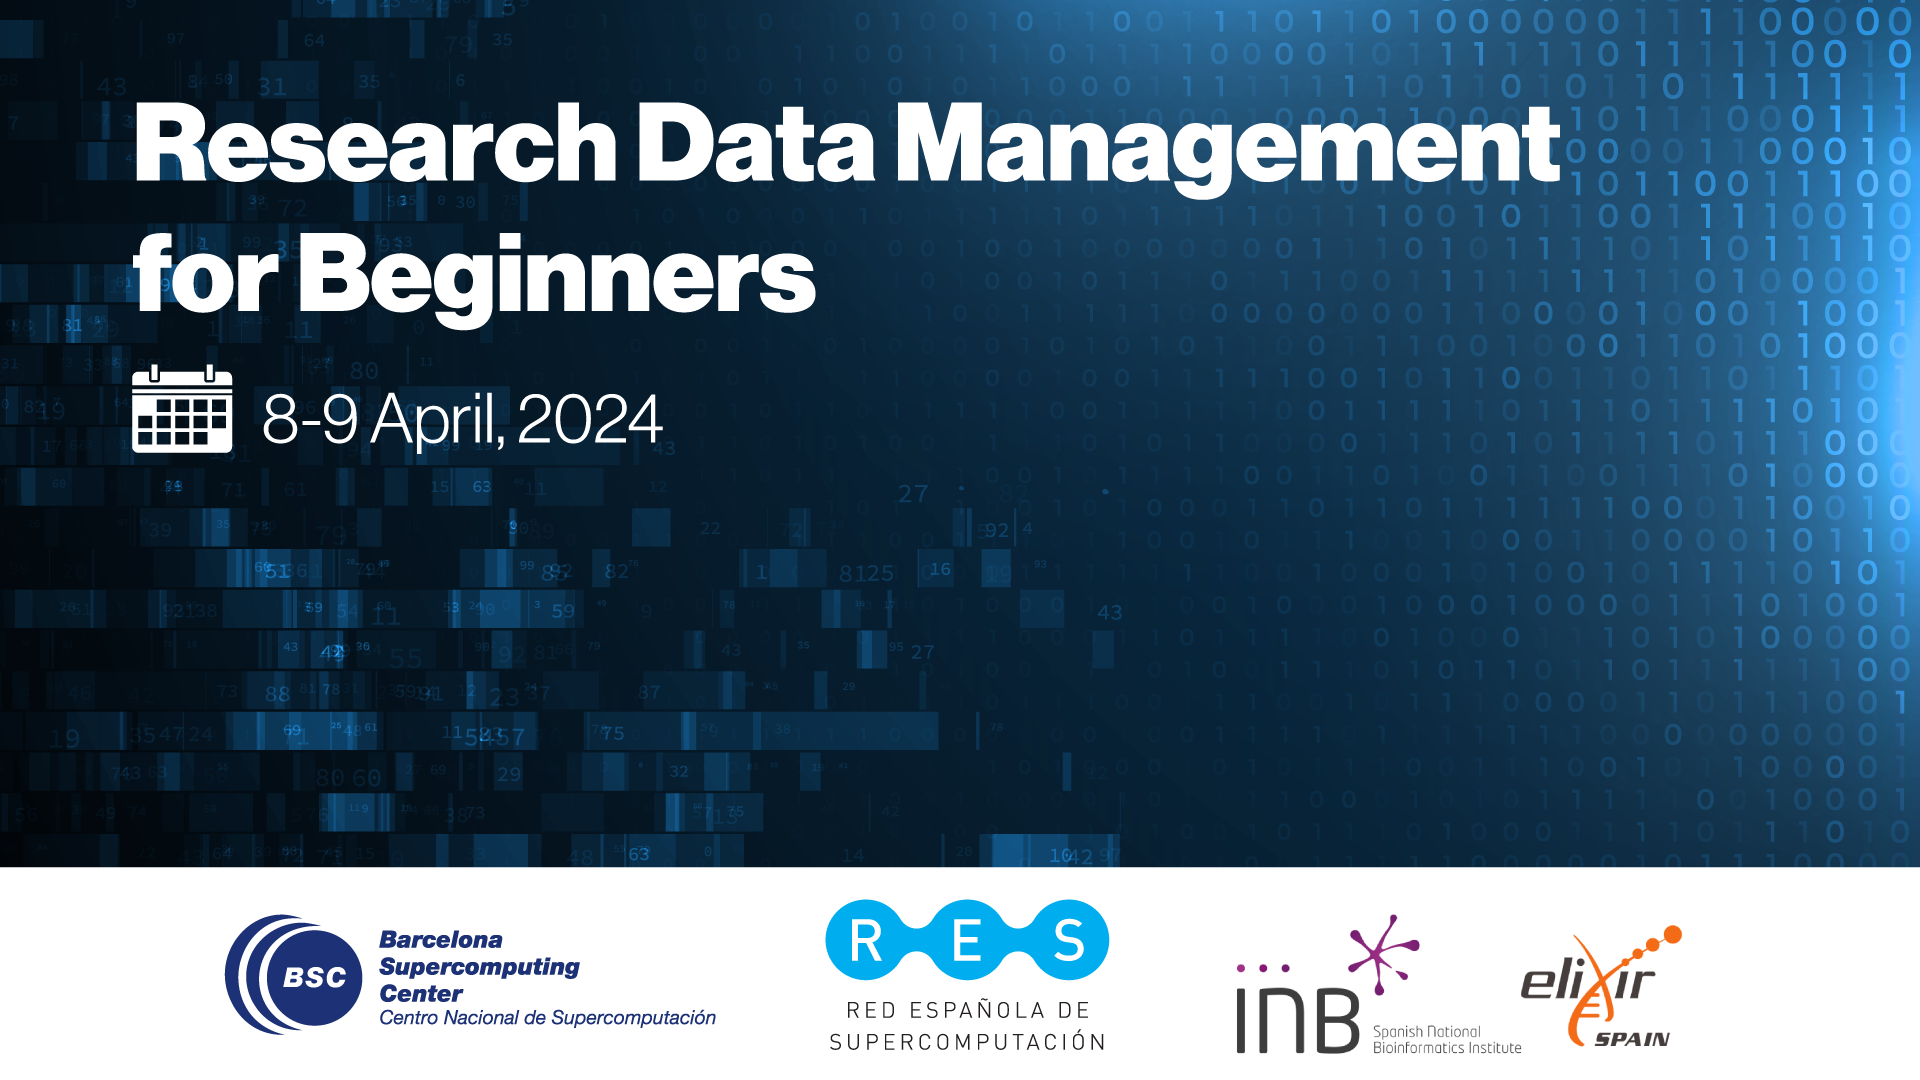 Research Data Management for Beginners